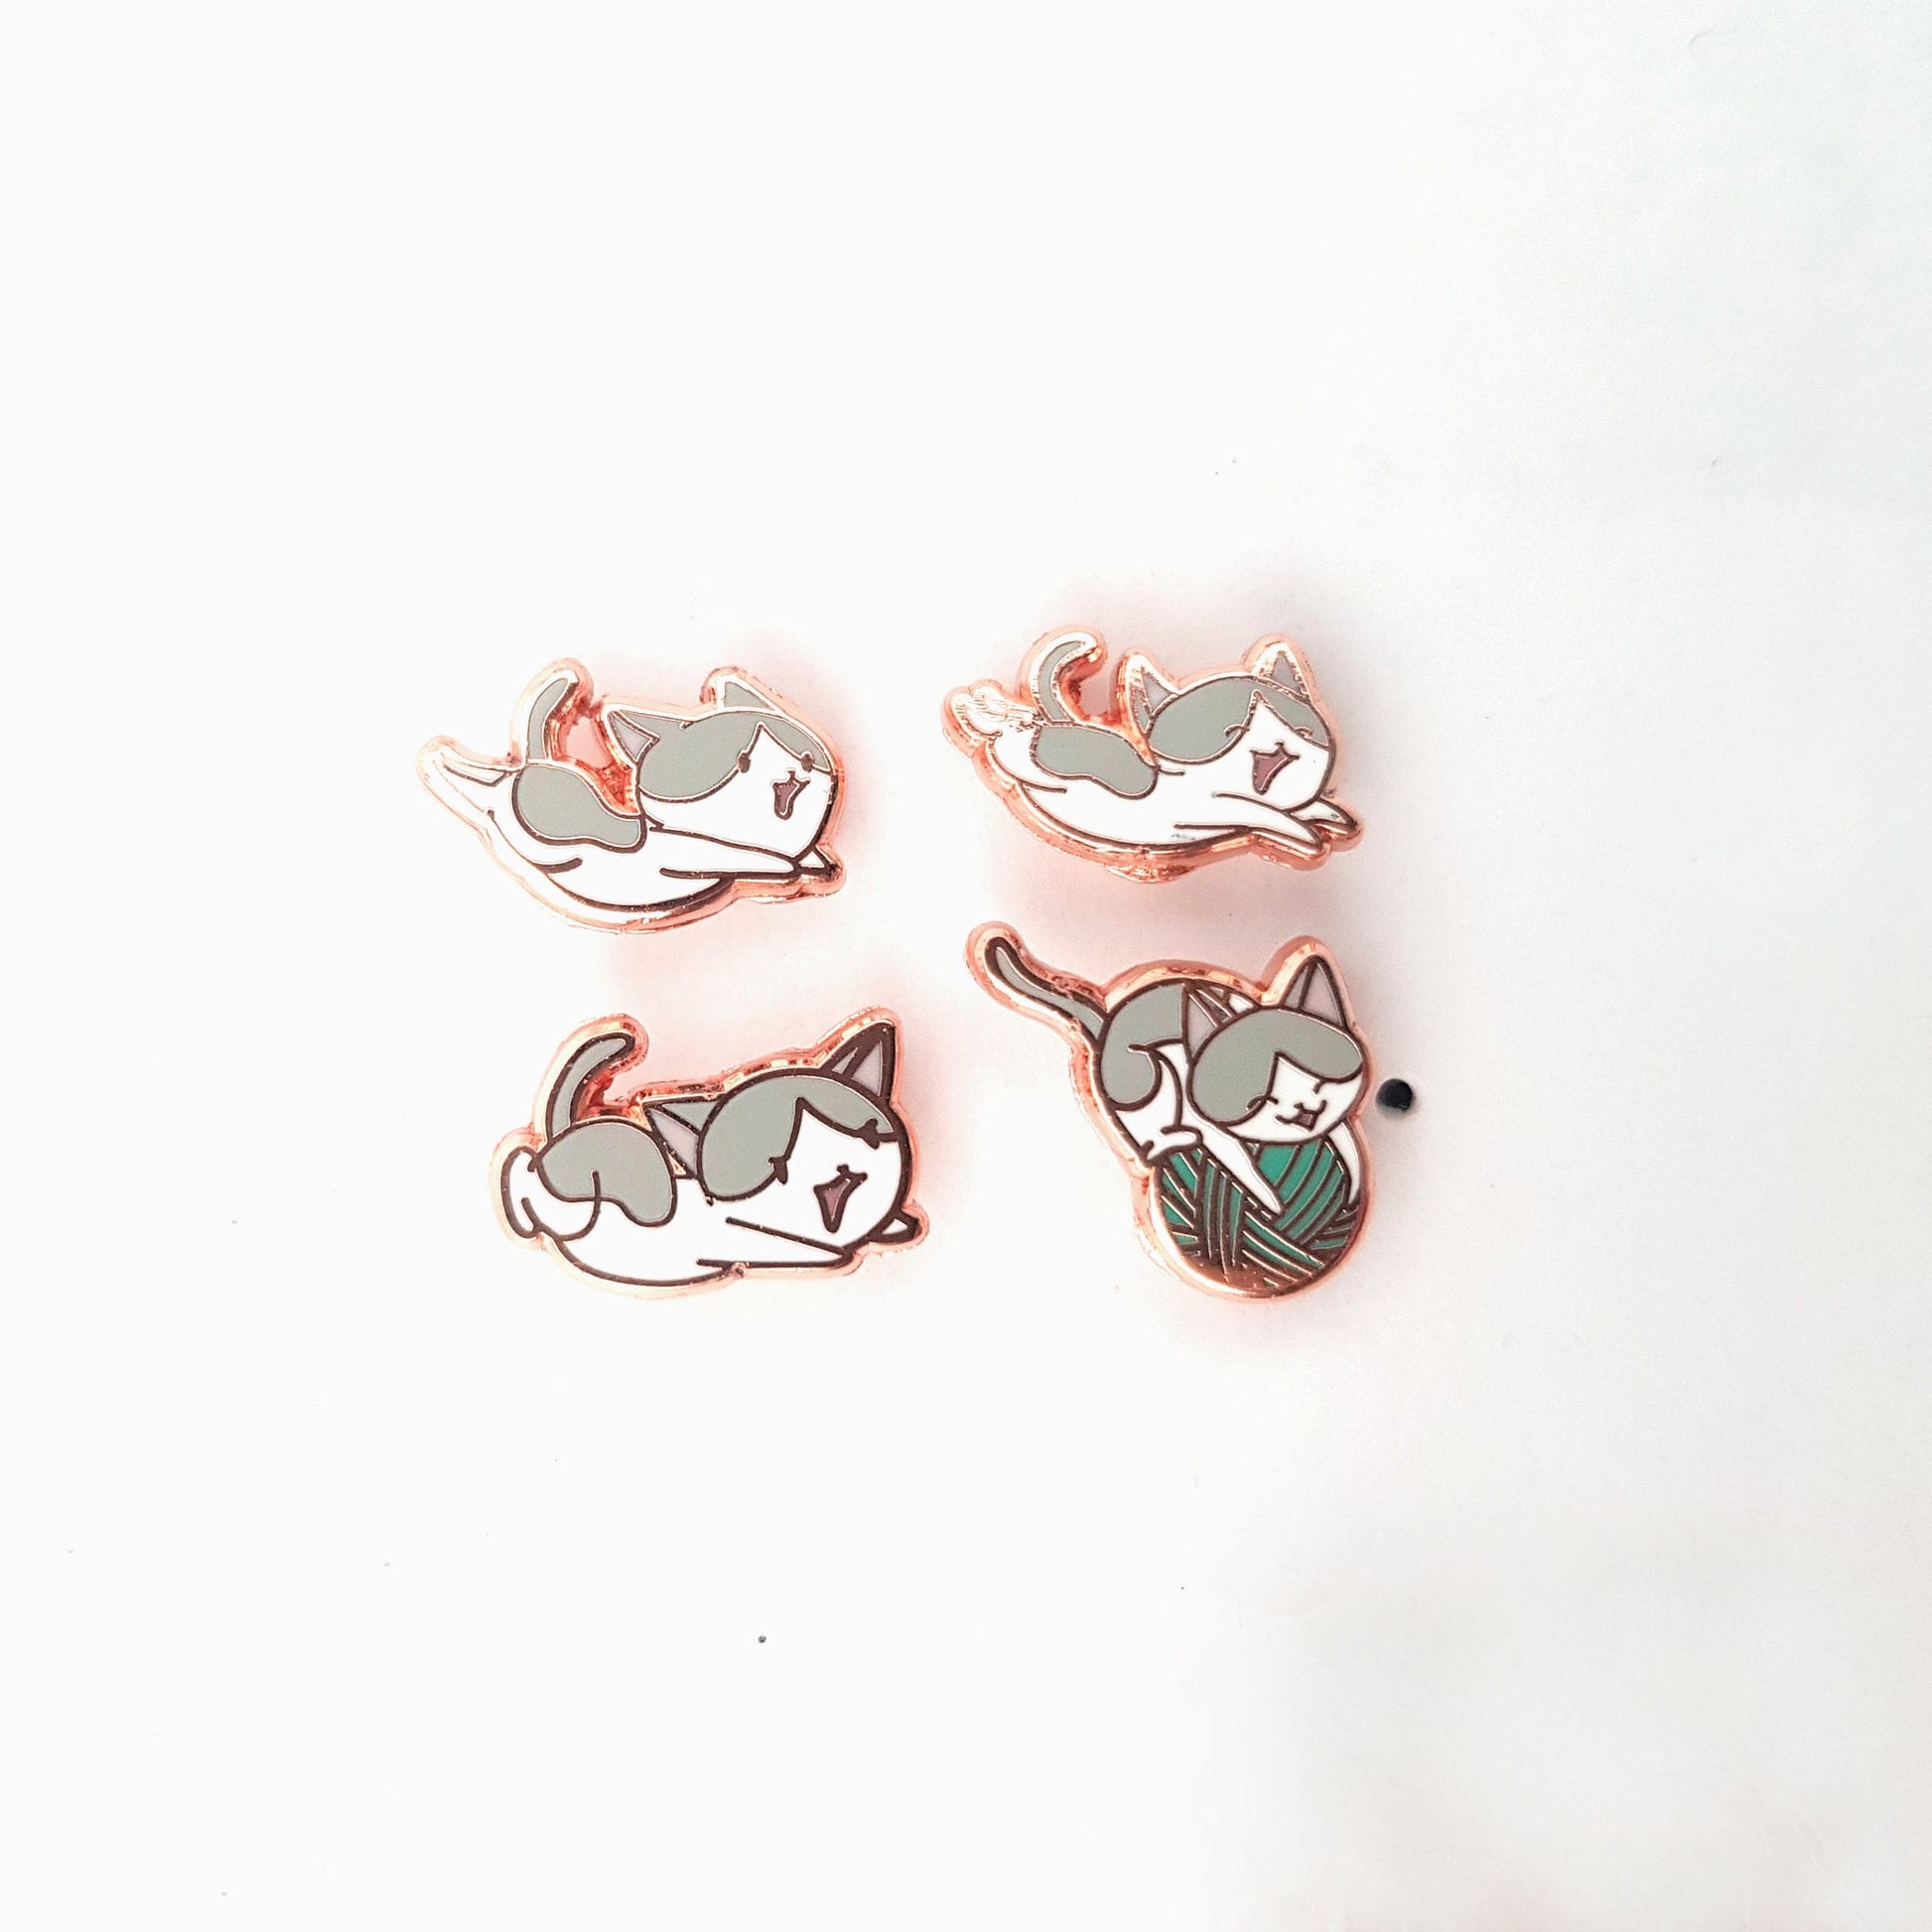 Mac the Special Needs Kitty - Tiny Enamel Pins (Set of 4), Pins, Brooches & Lapel Pins